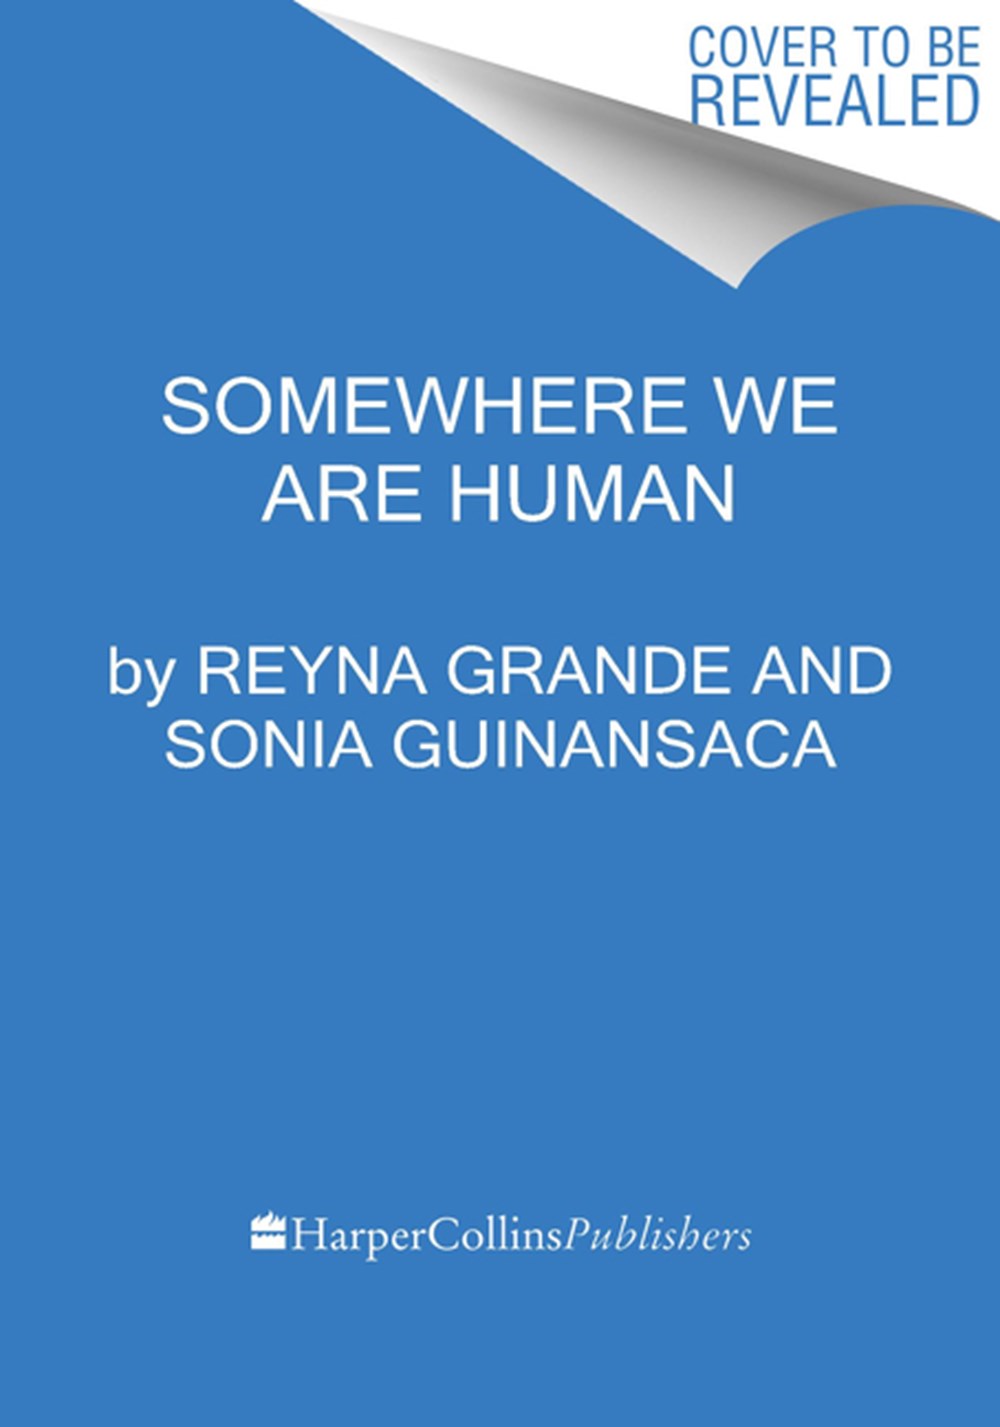 Somewhere We Are Human Authentic Voices on Migration, Survival, and New Beginnings